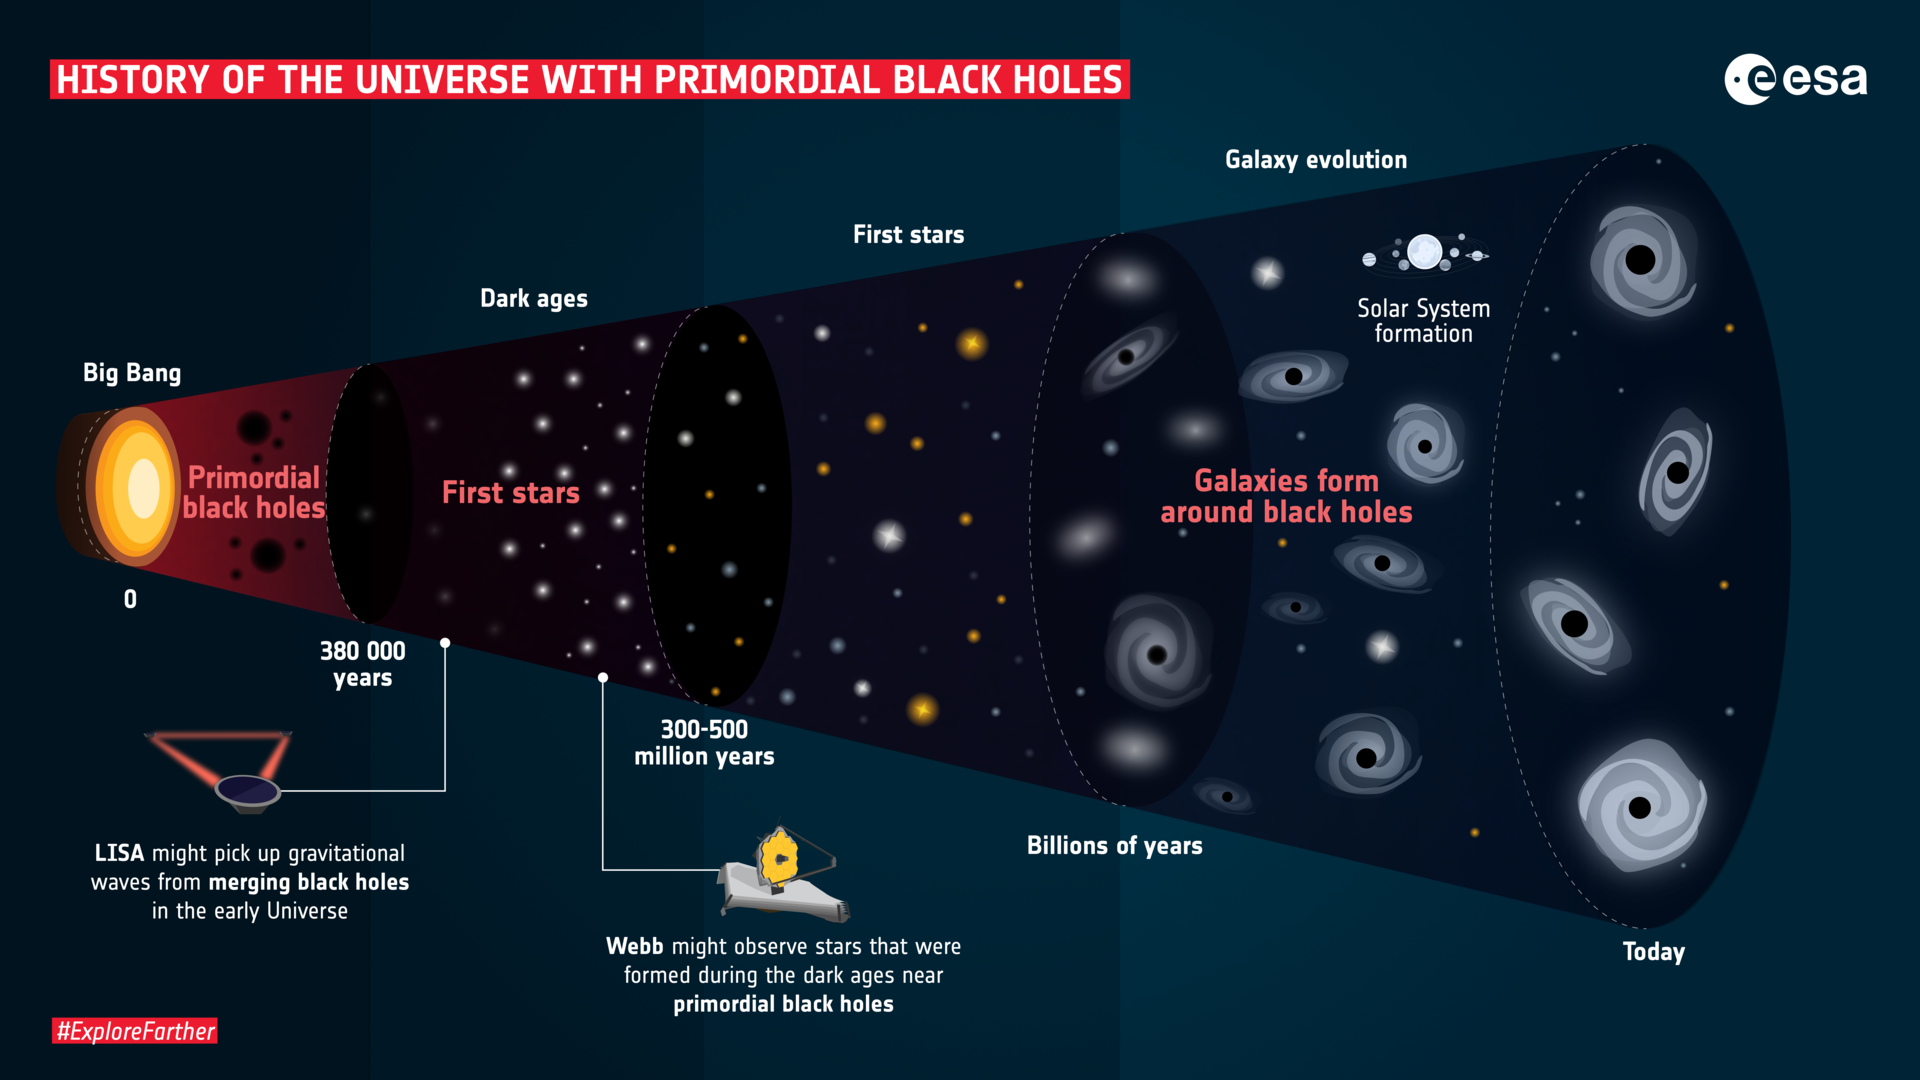 ESA - History of the Universe with primordial black holes